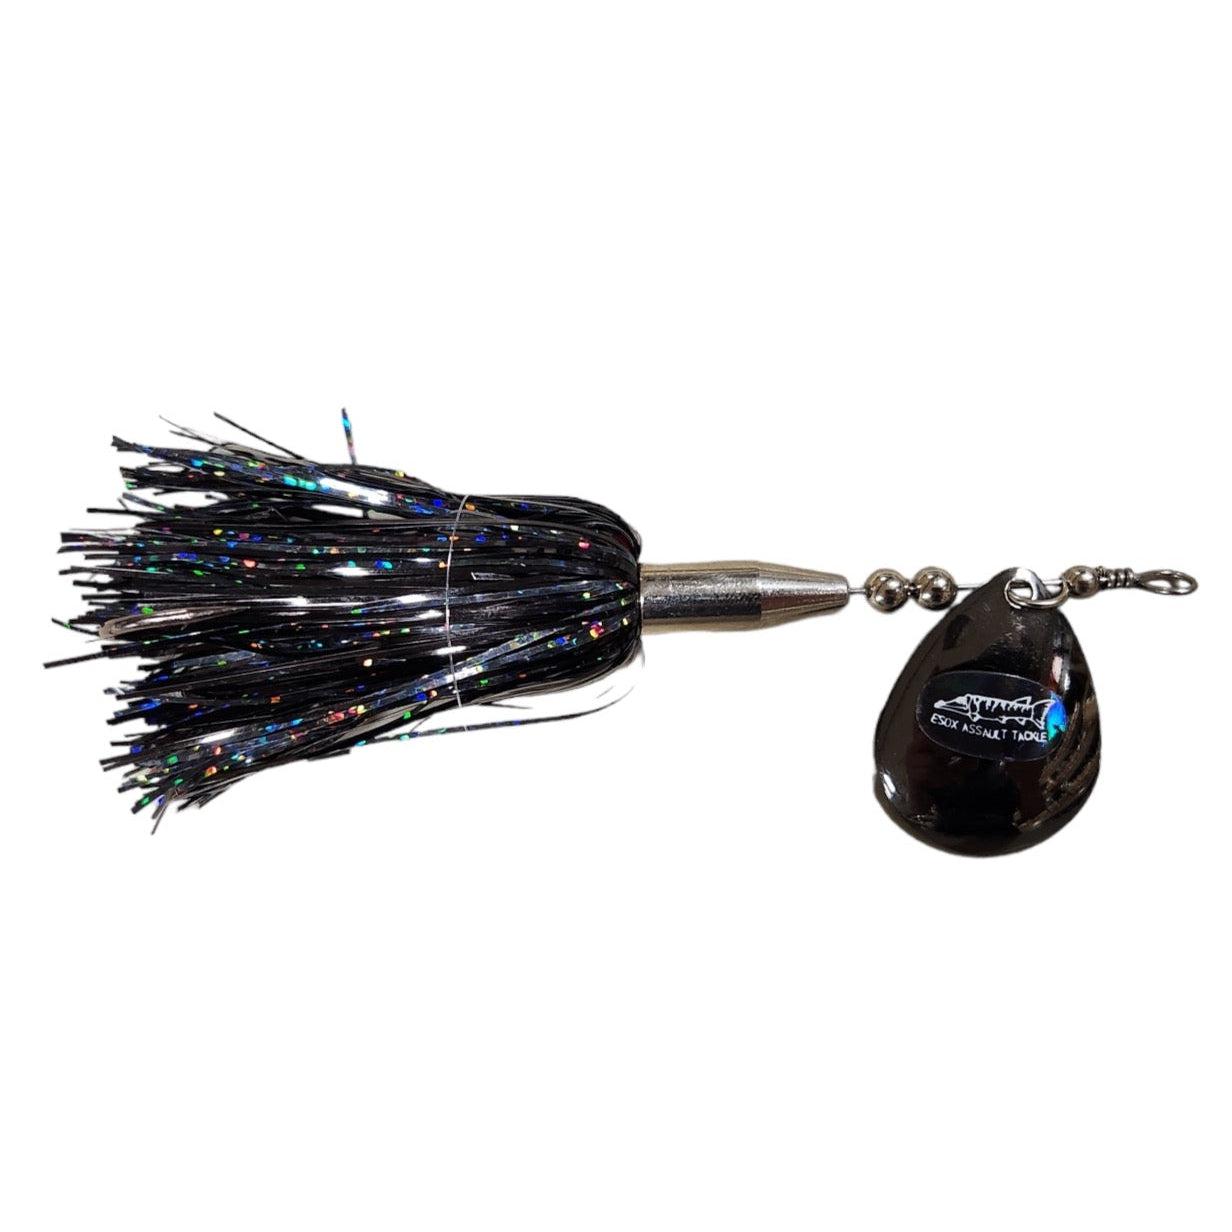 View of Bucktails Esox Assault Single 6 Bucktail Smoke available at EZOKO Pike and Musky Shop